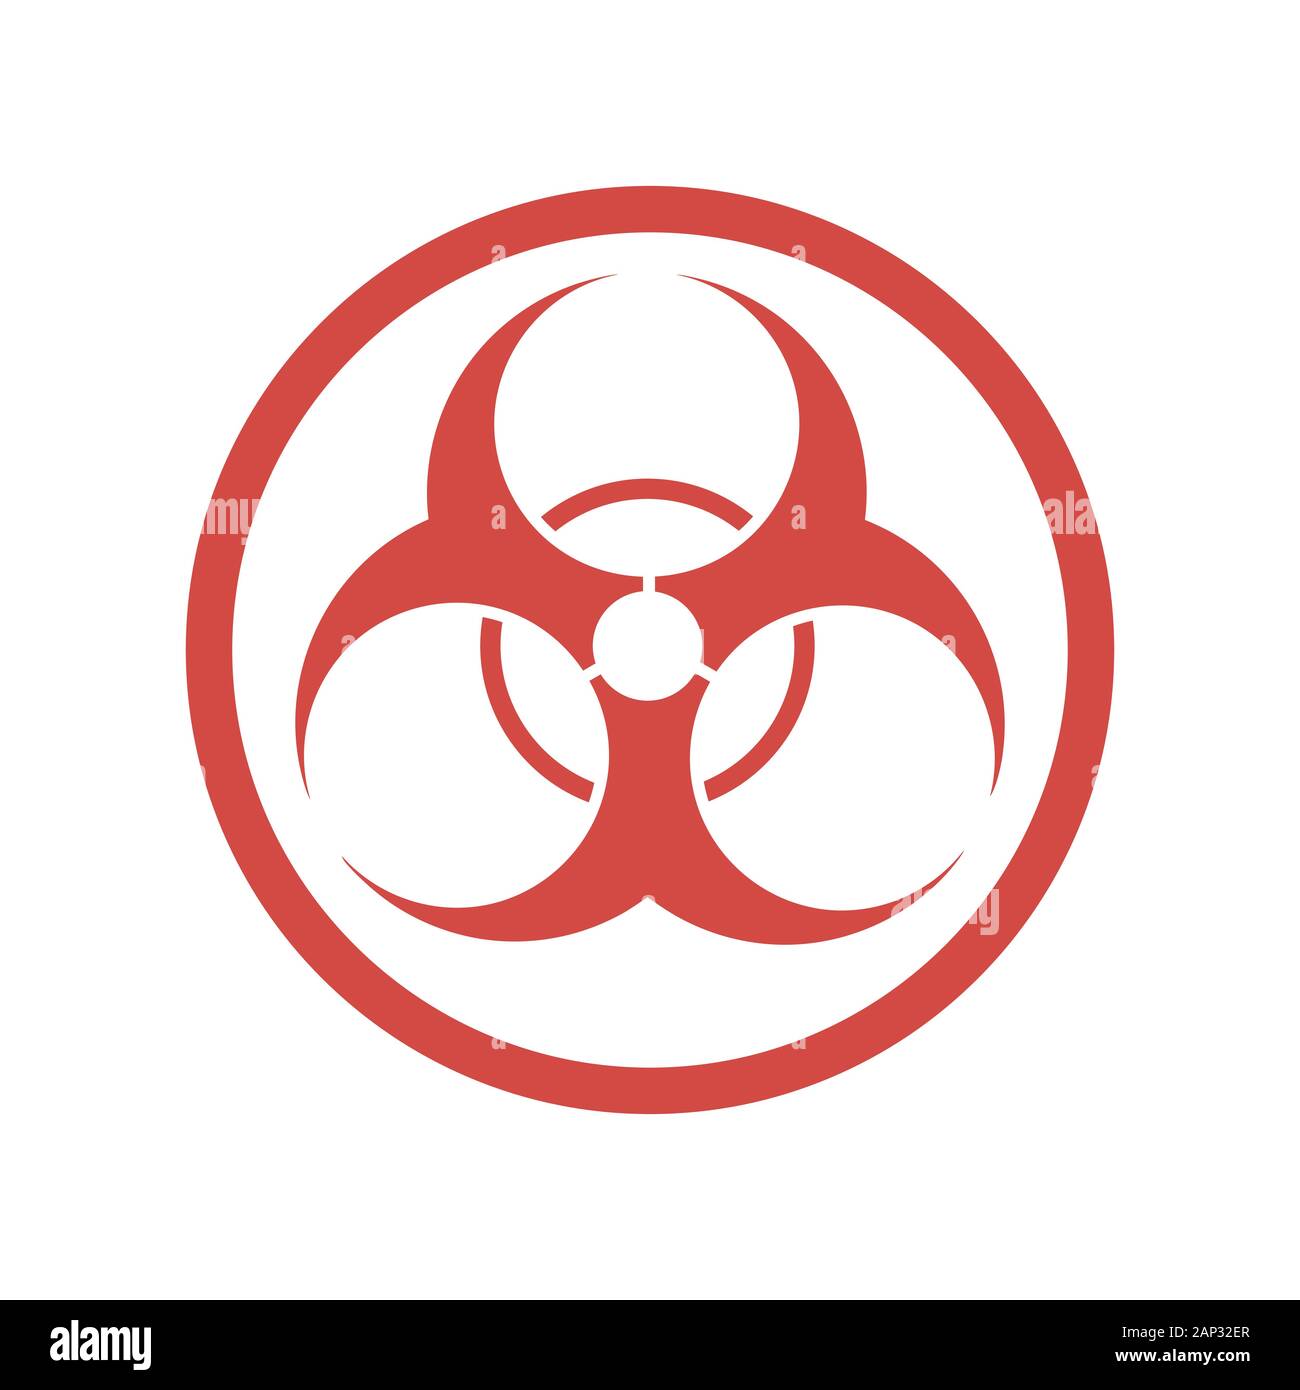 Biohazard icon in flat design. Vector illustration. Red symbol of biohazard, isolated on white background. Stock Vector